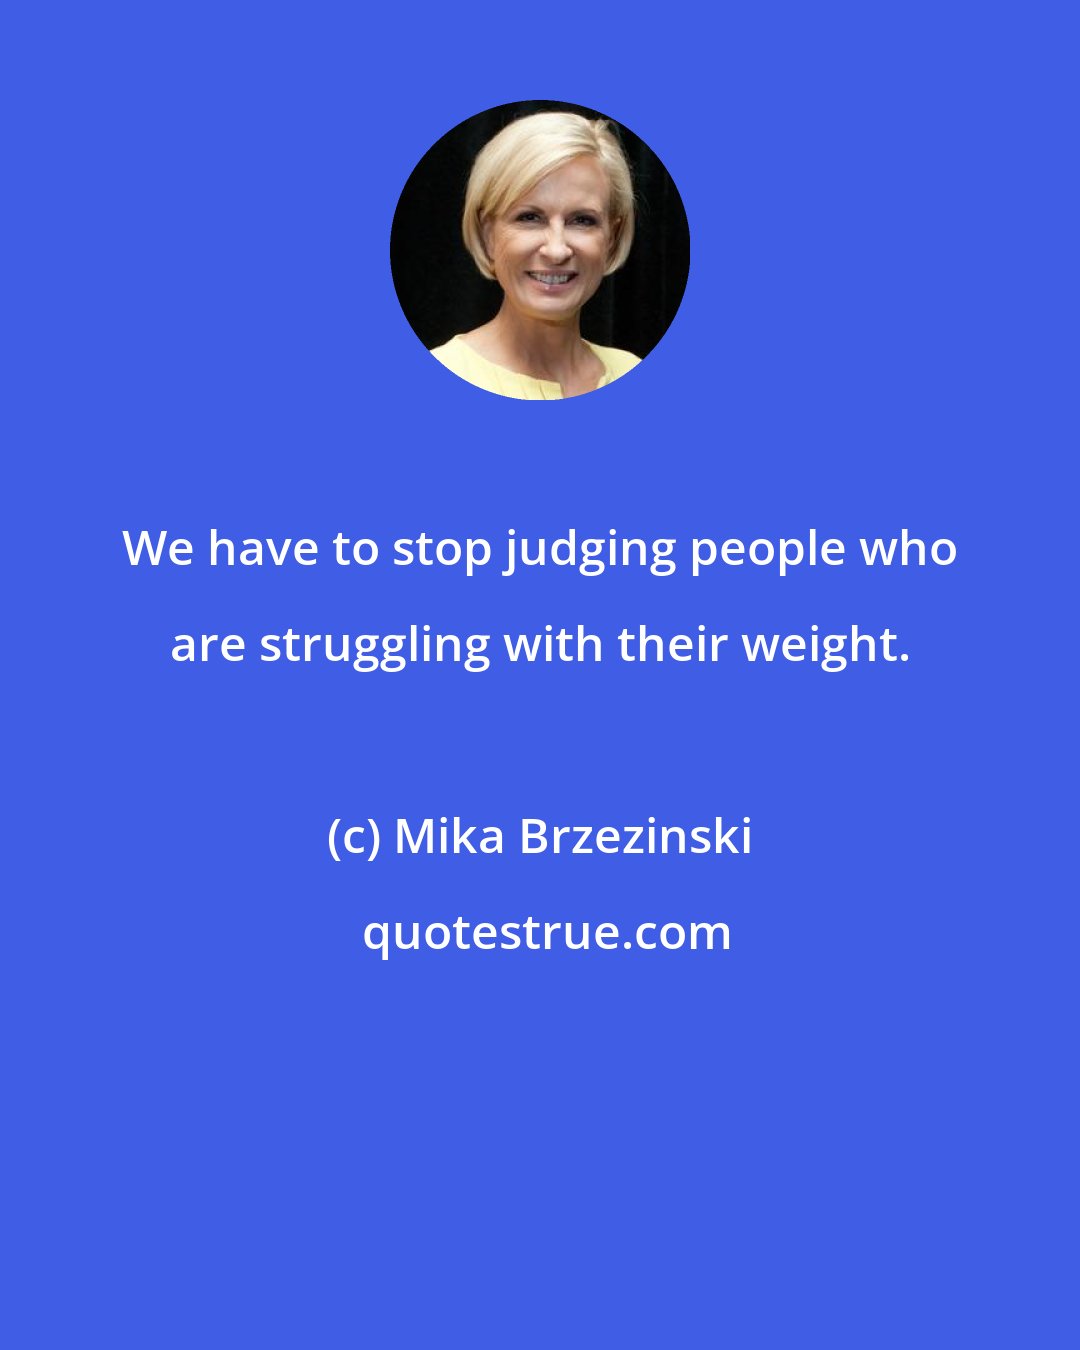 Mika Brzezinski: We have to stop judging people who are struggling with their weight.